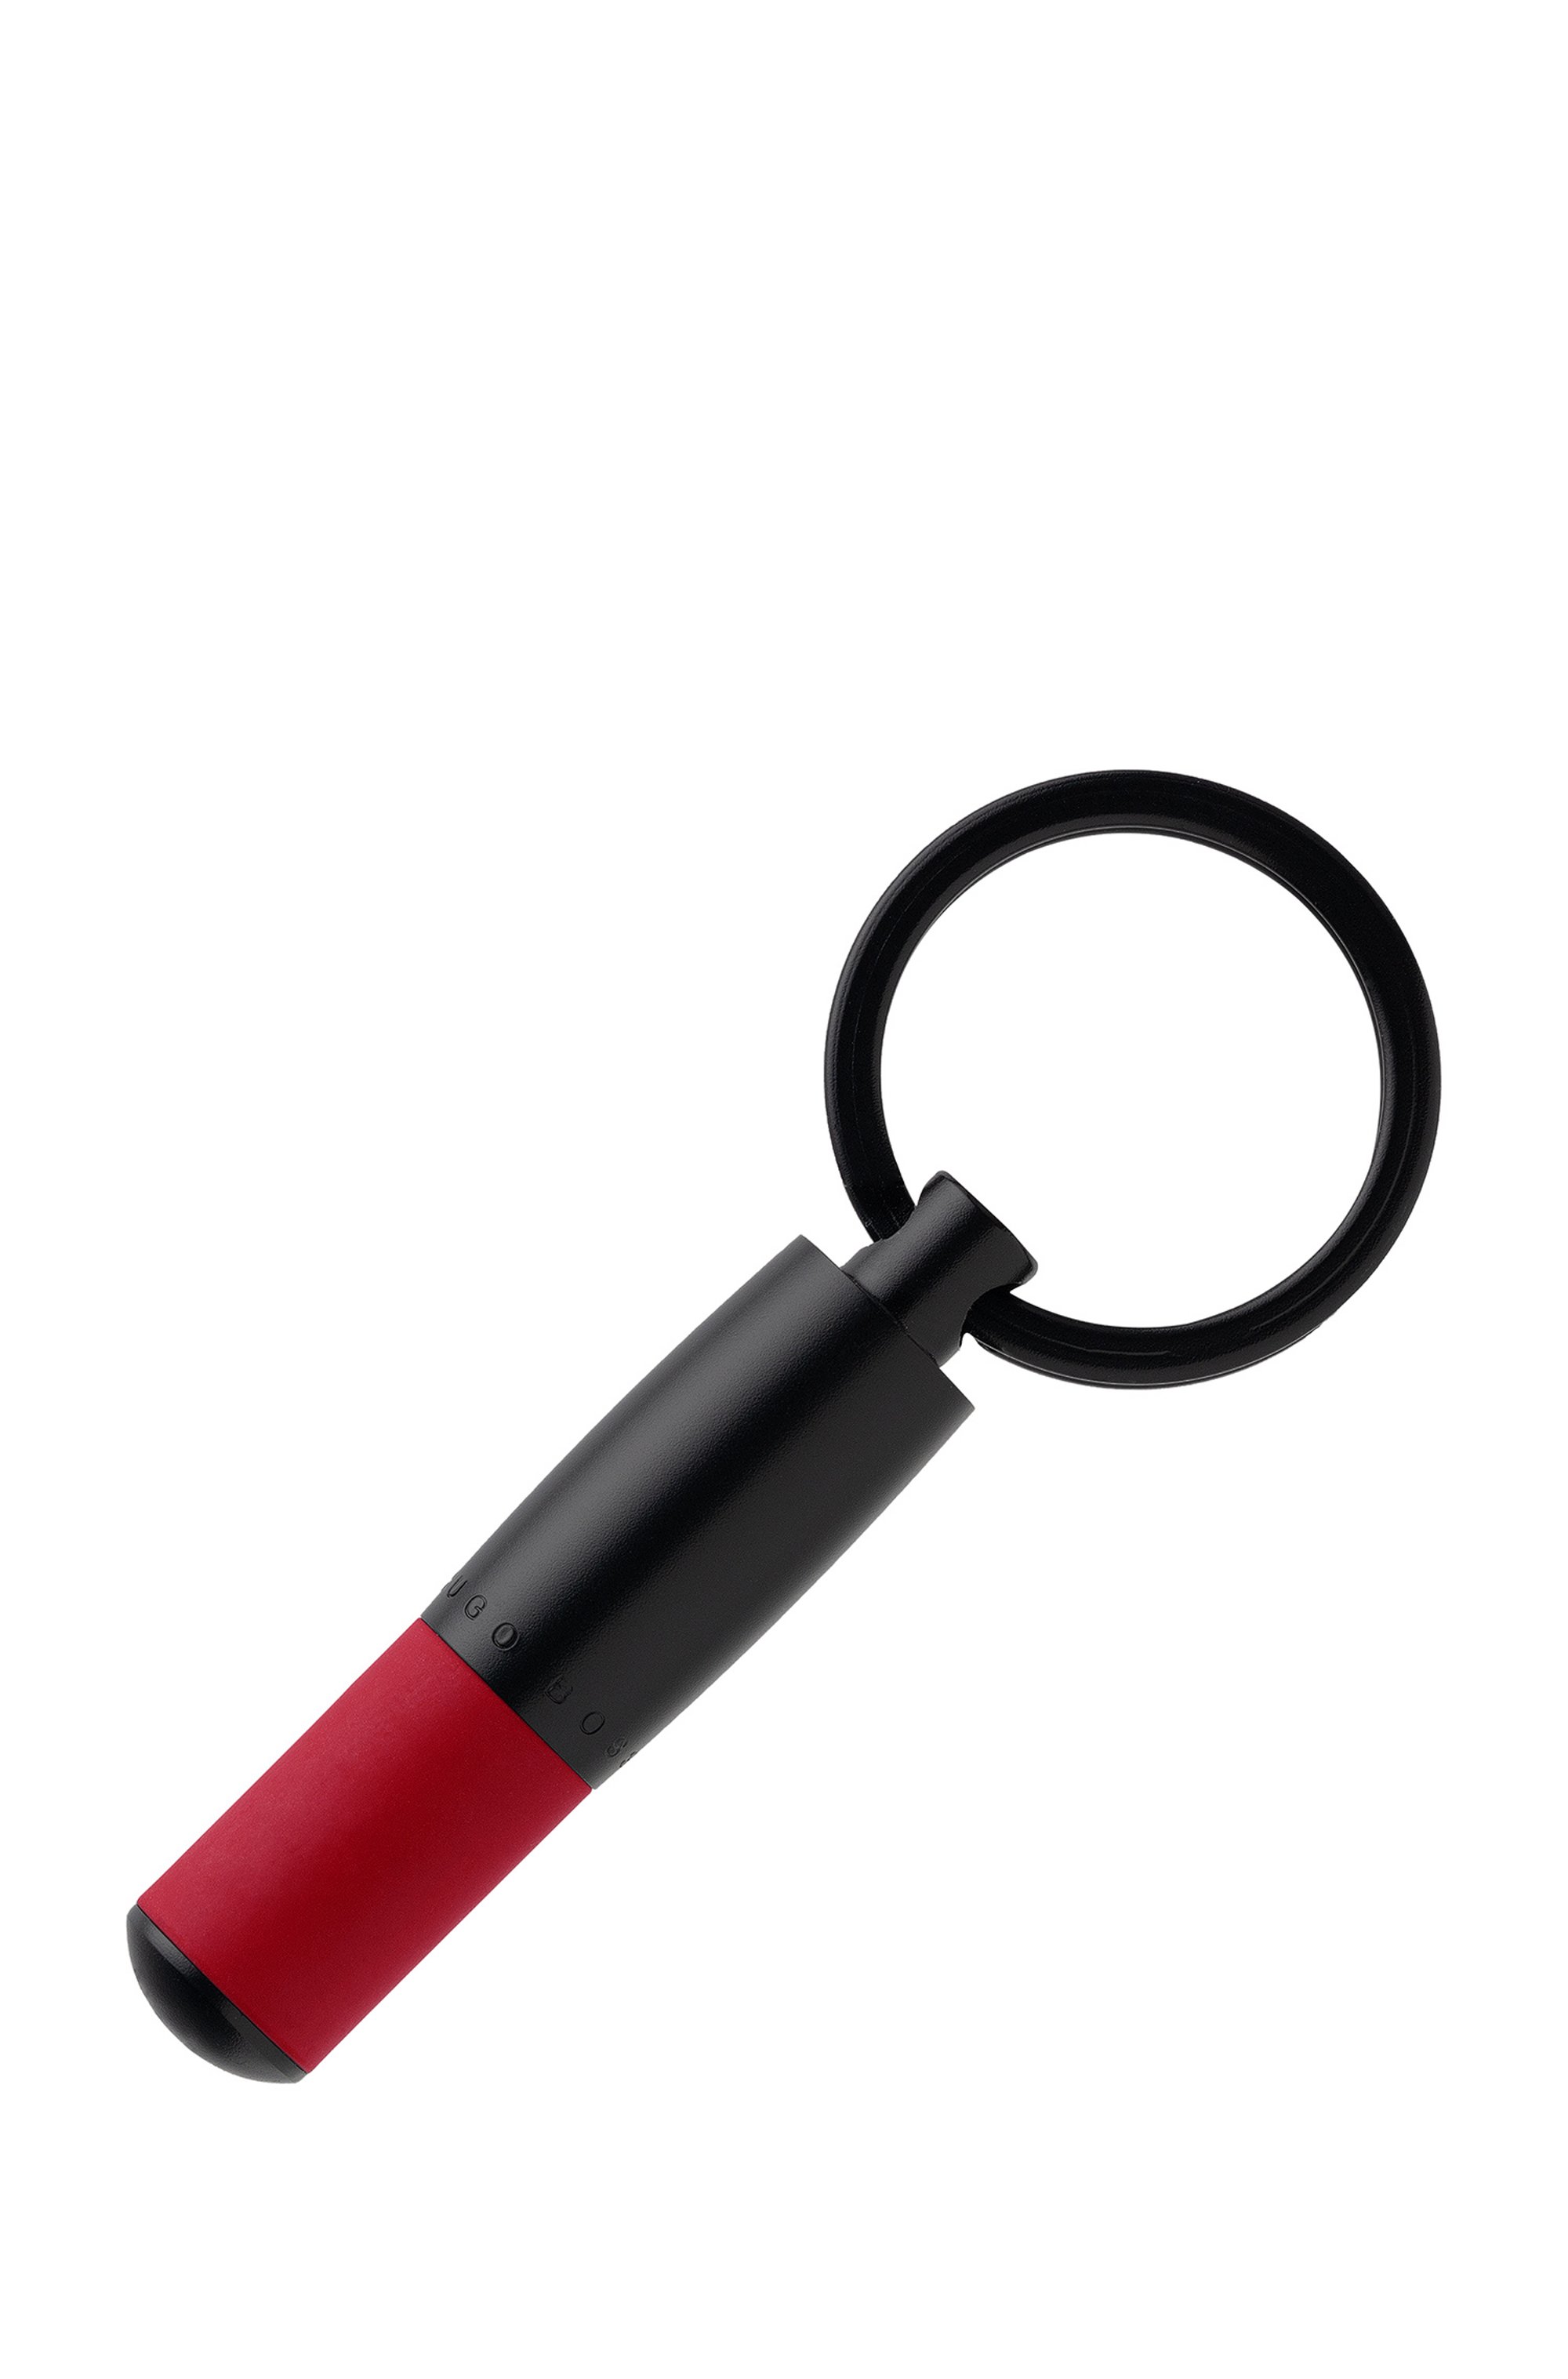 Matte-black and red rubberised key ring with logo, Black